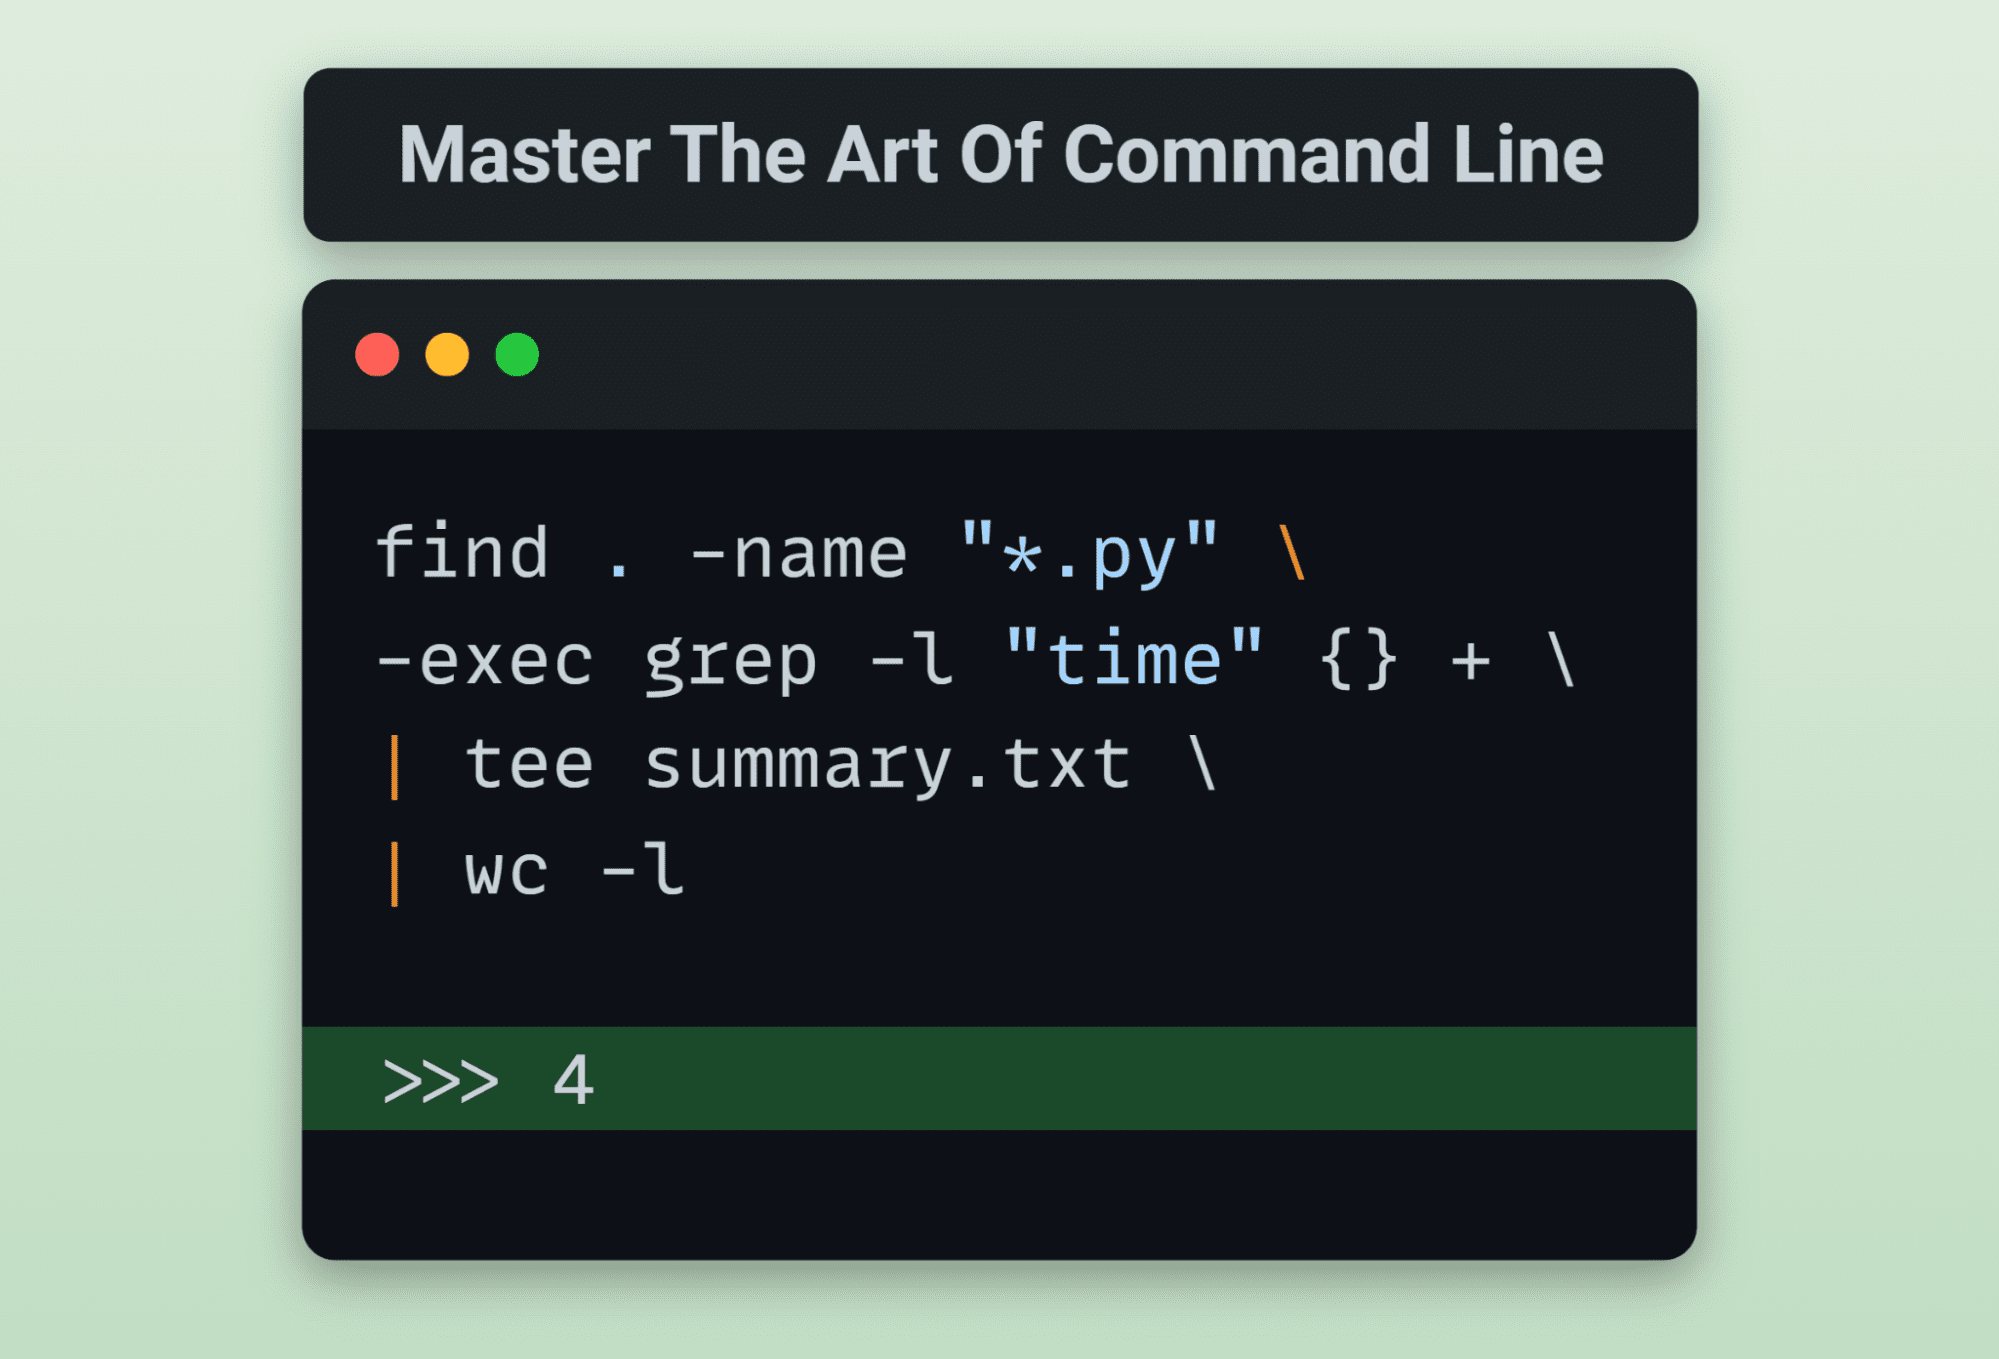 Master the art of the command line with this GitHub repository